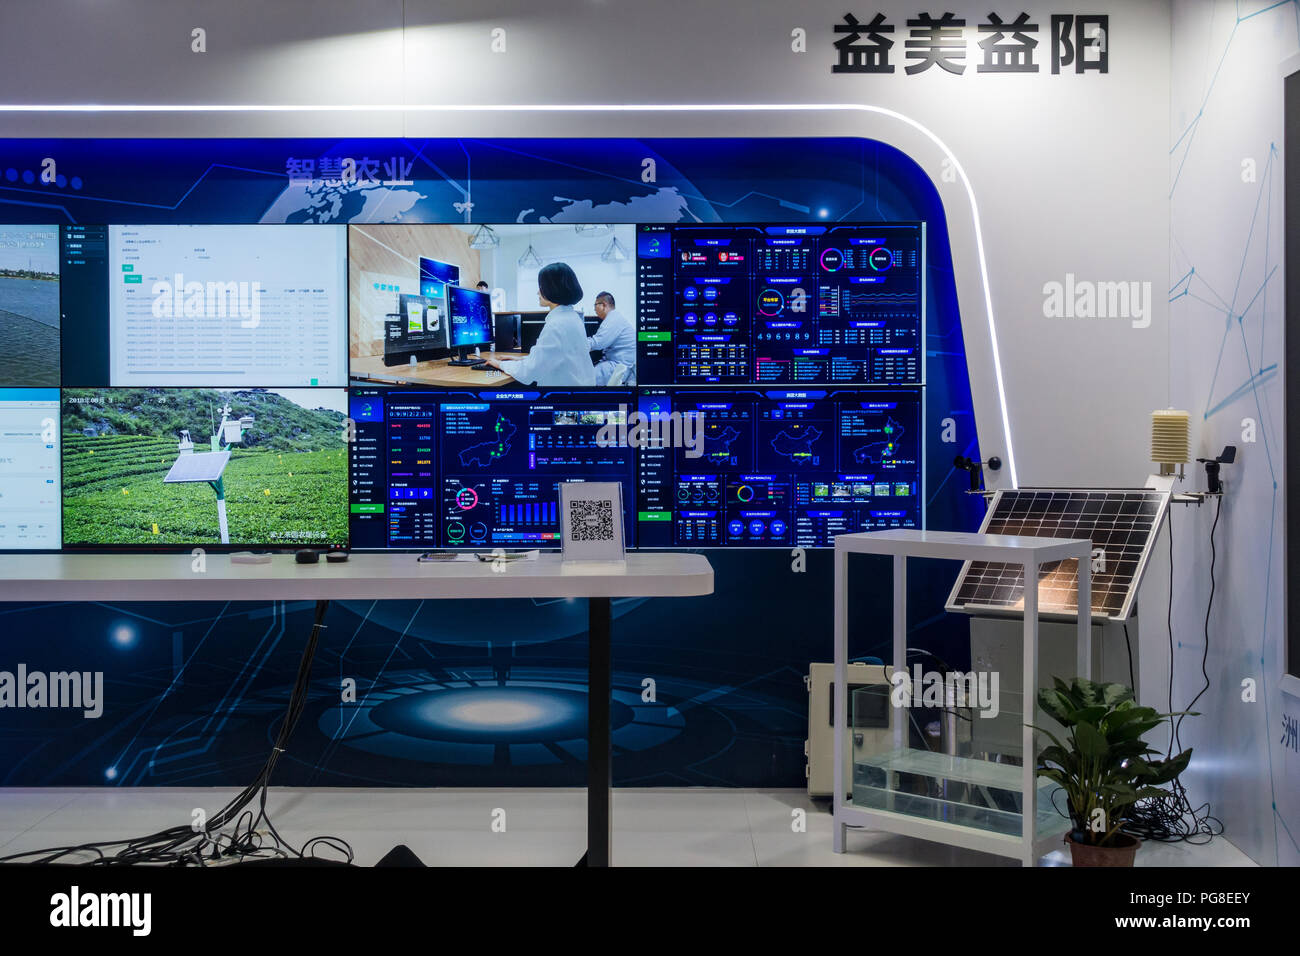 Control room of smart city in Shenzhen, China showing graphs and data of city operations Stock Photo